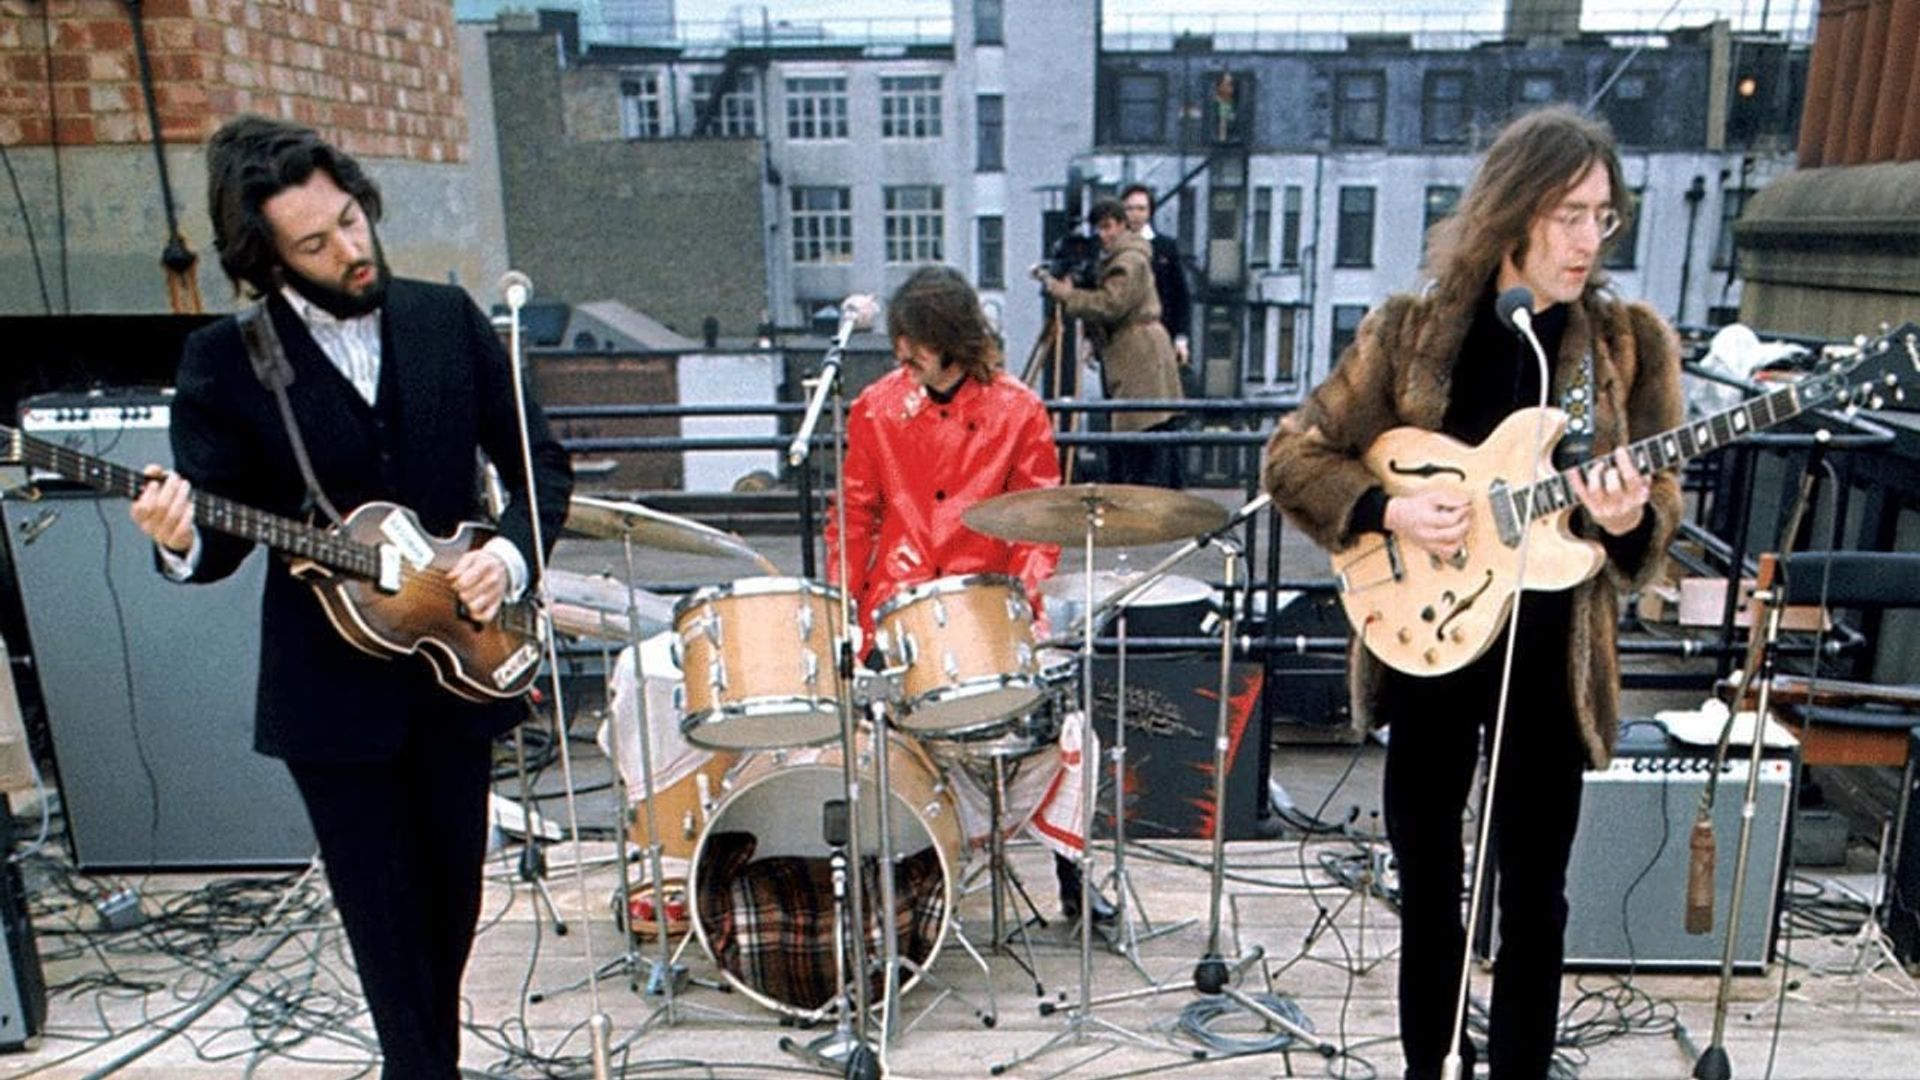 The Beatles: Get Back - The Rooftop Concert background